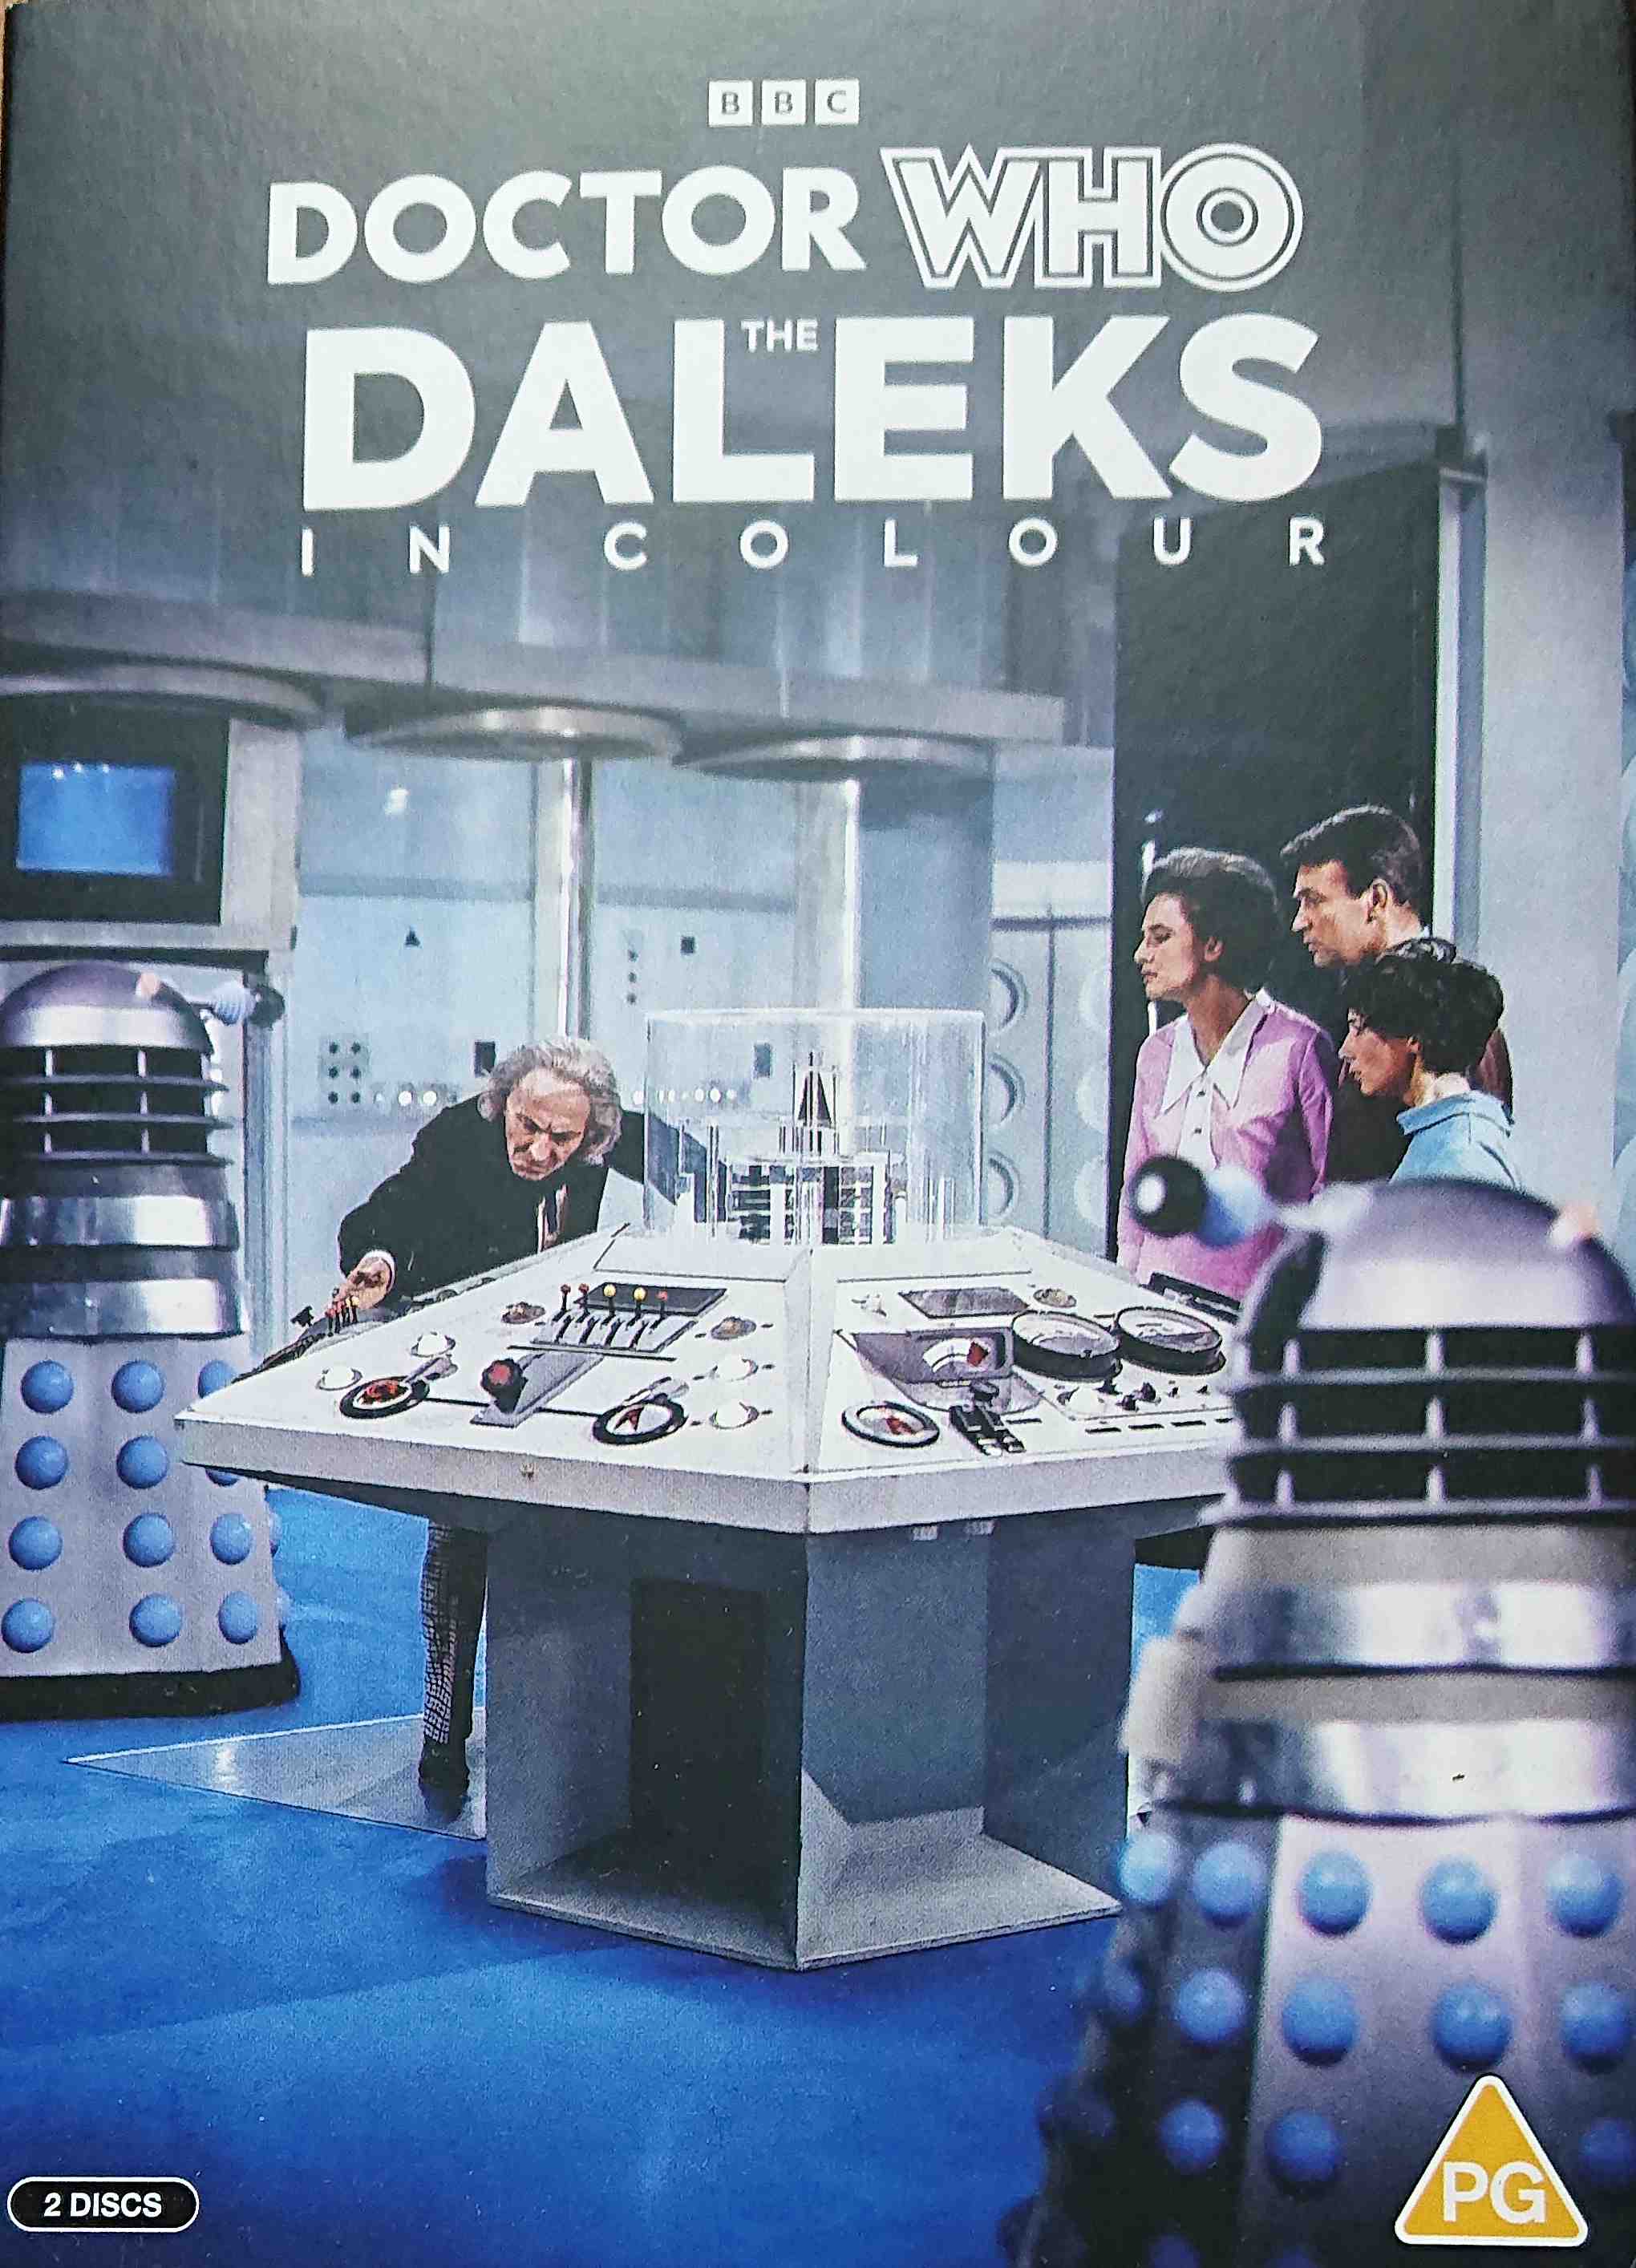 Picture of BBCDVD 4580 Doctor Who - The Daleks - In colour by artist Terry Nation from the BBC dvds - Records and Tapes library